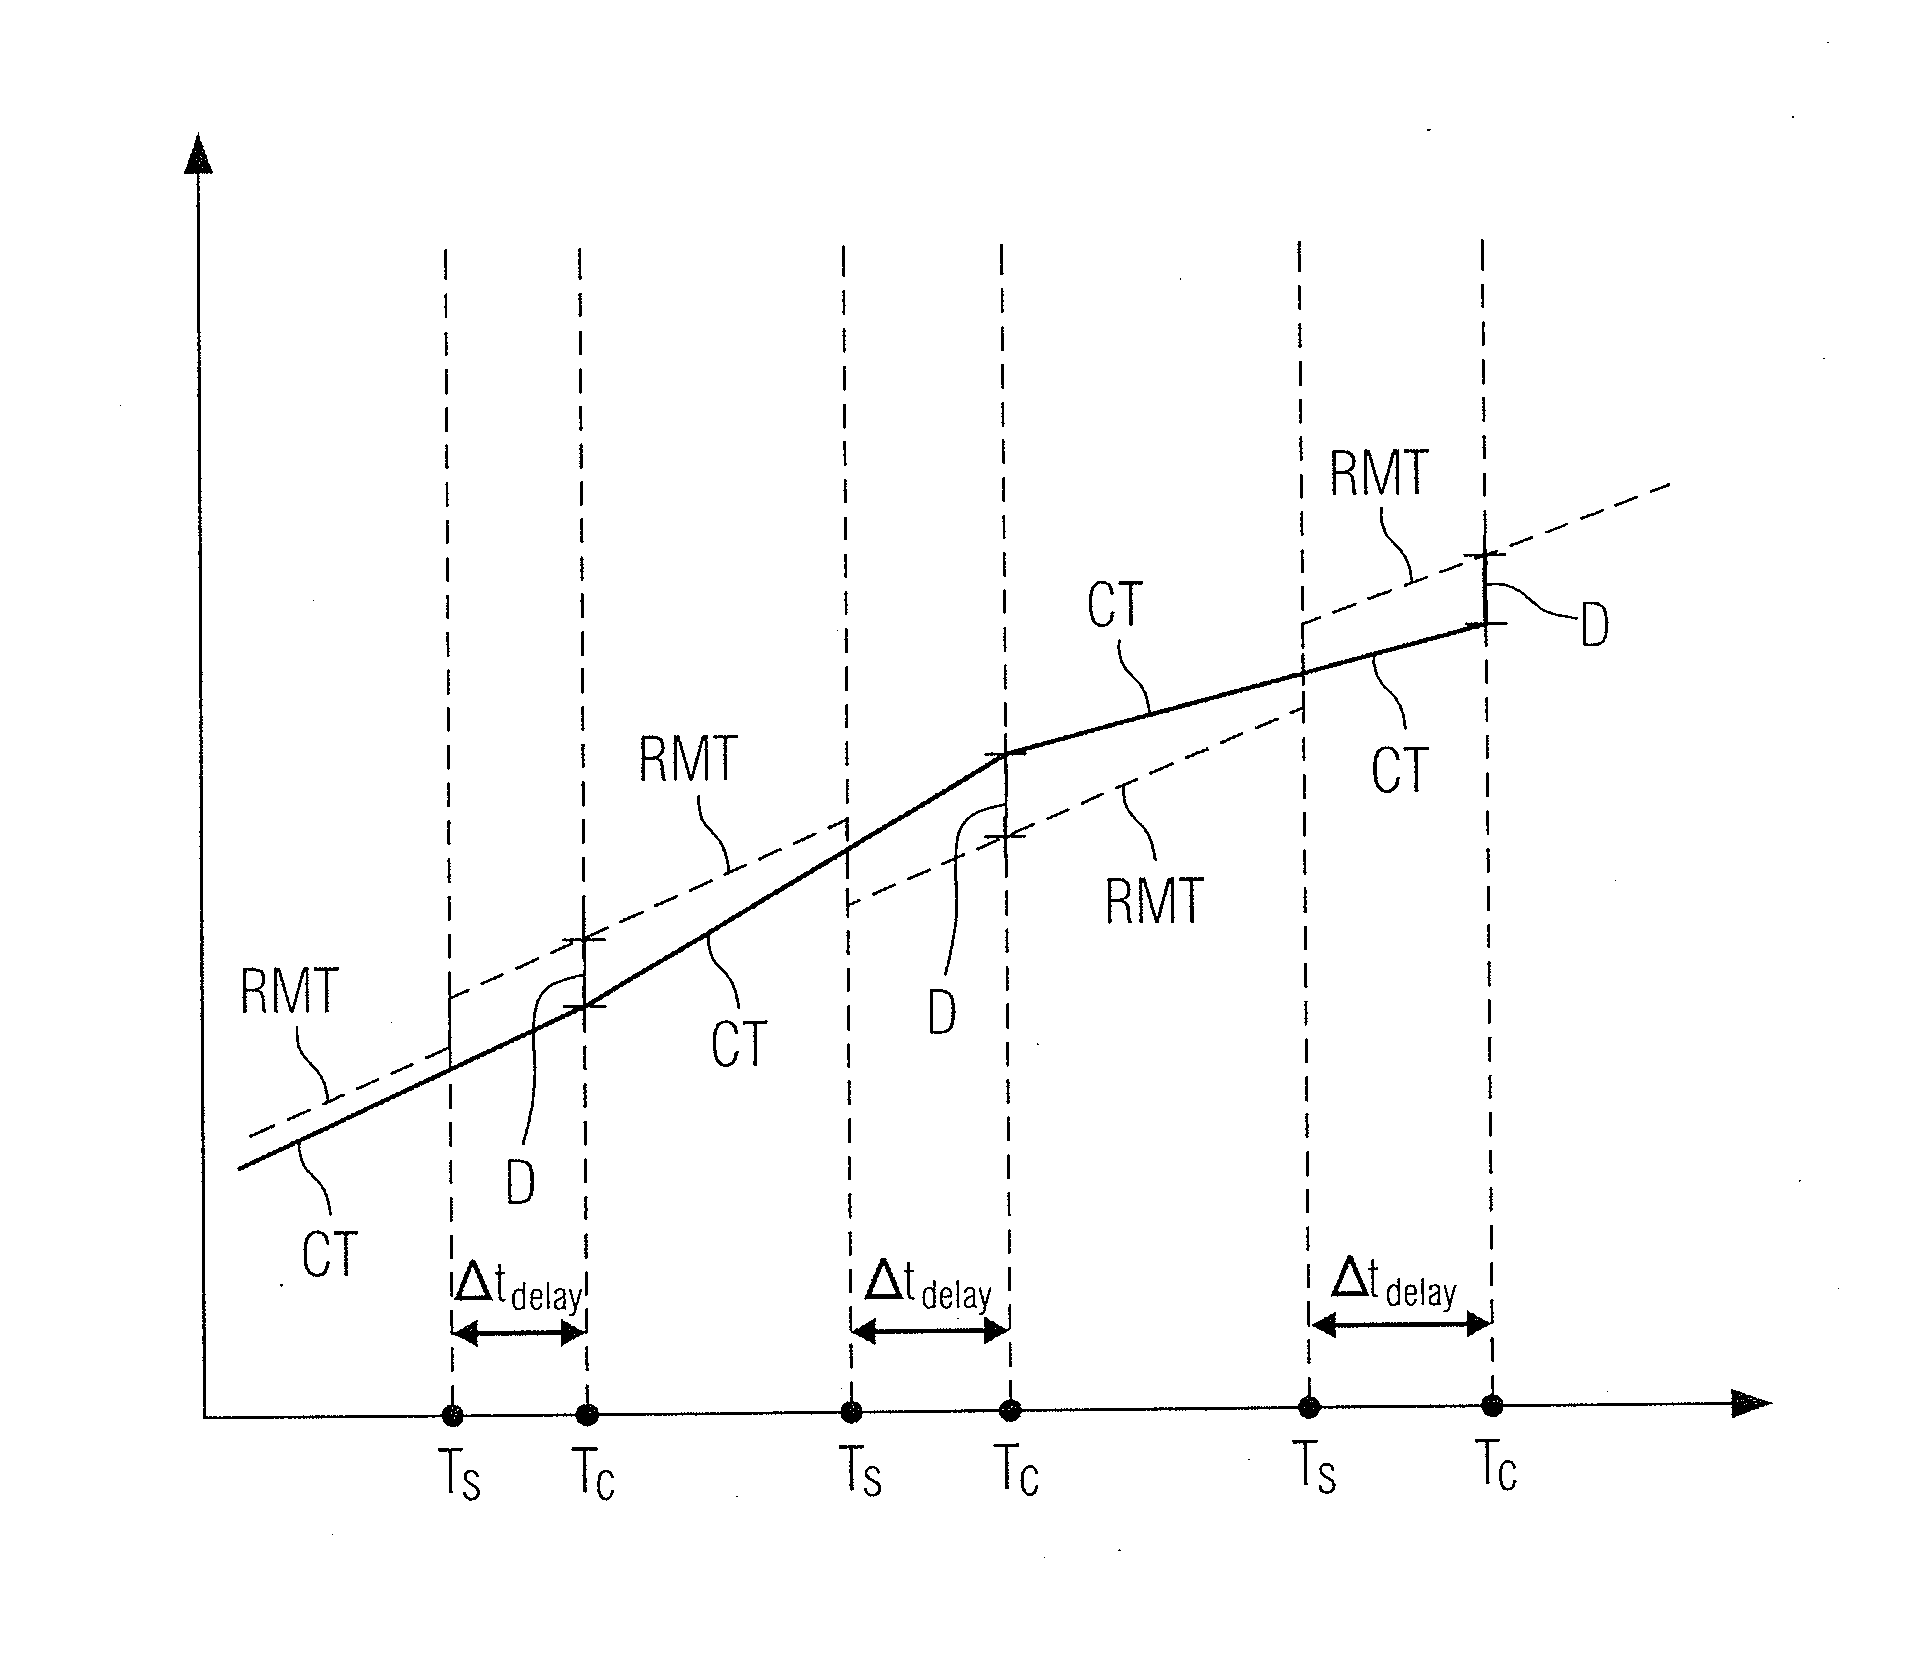 System and Method for Time Synchronization in a Communication Network